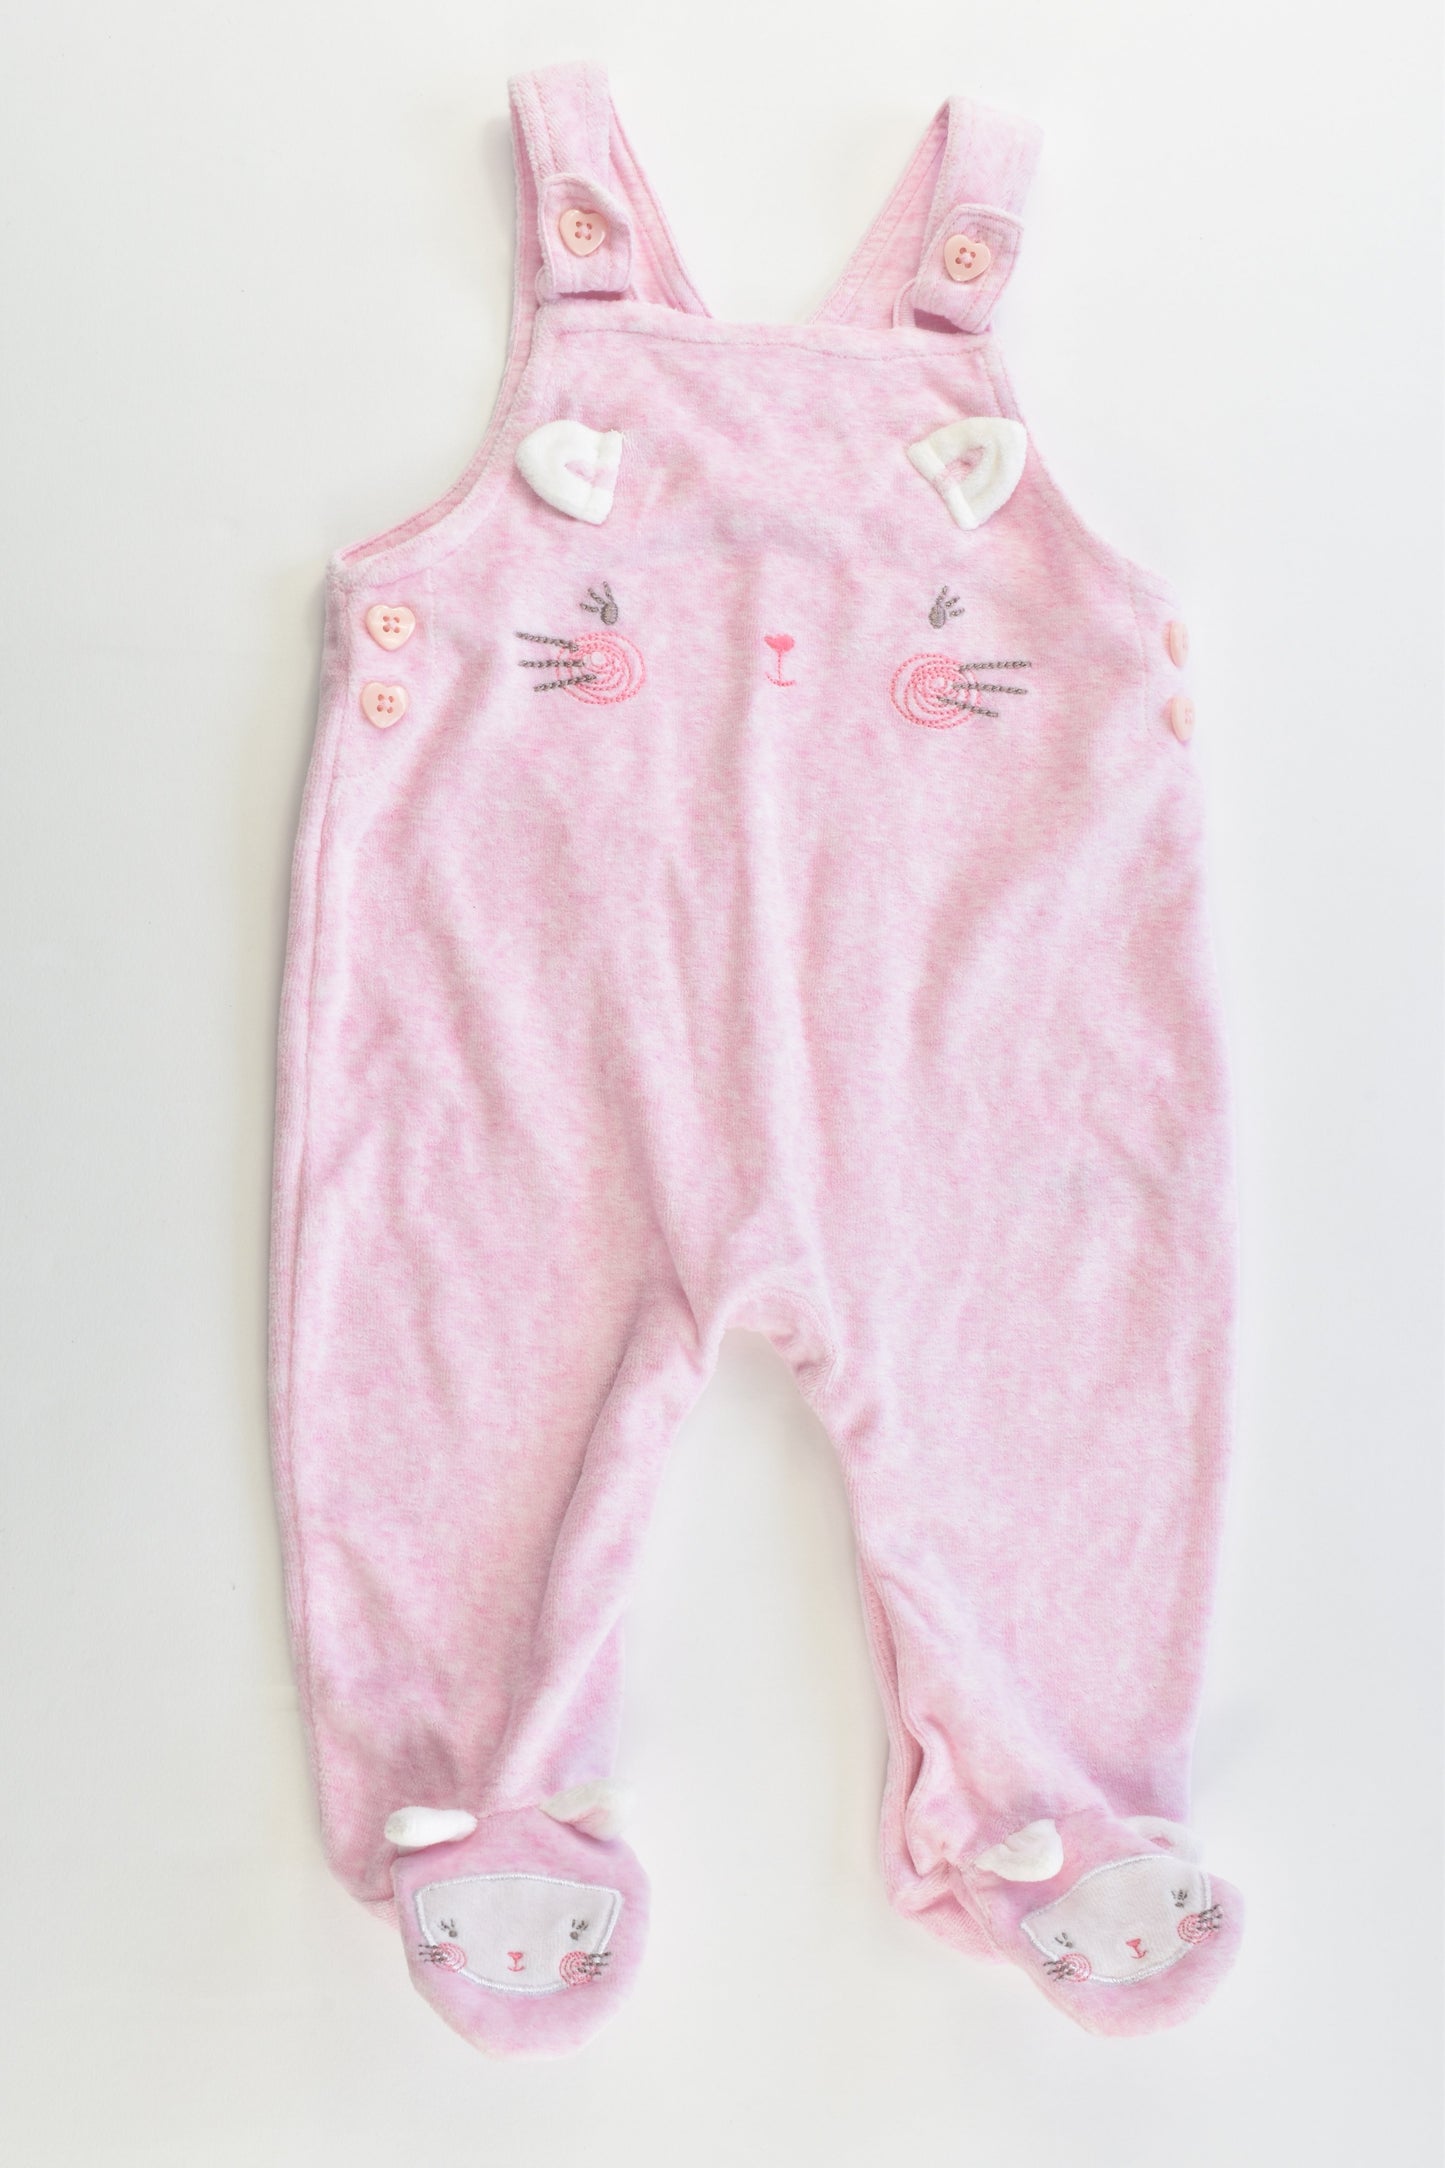 George Size 00 (3-6 months) Footed Kitty Velour Overalls